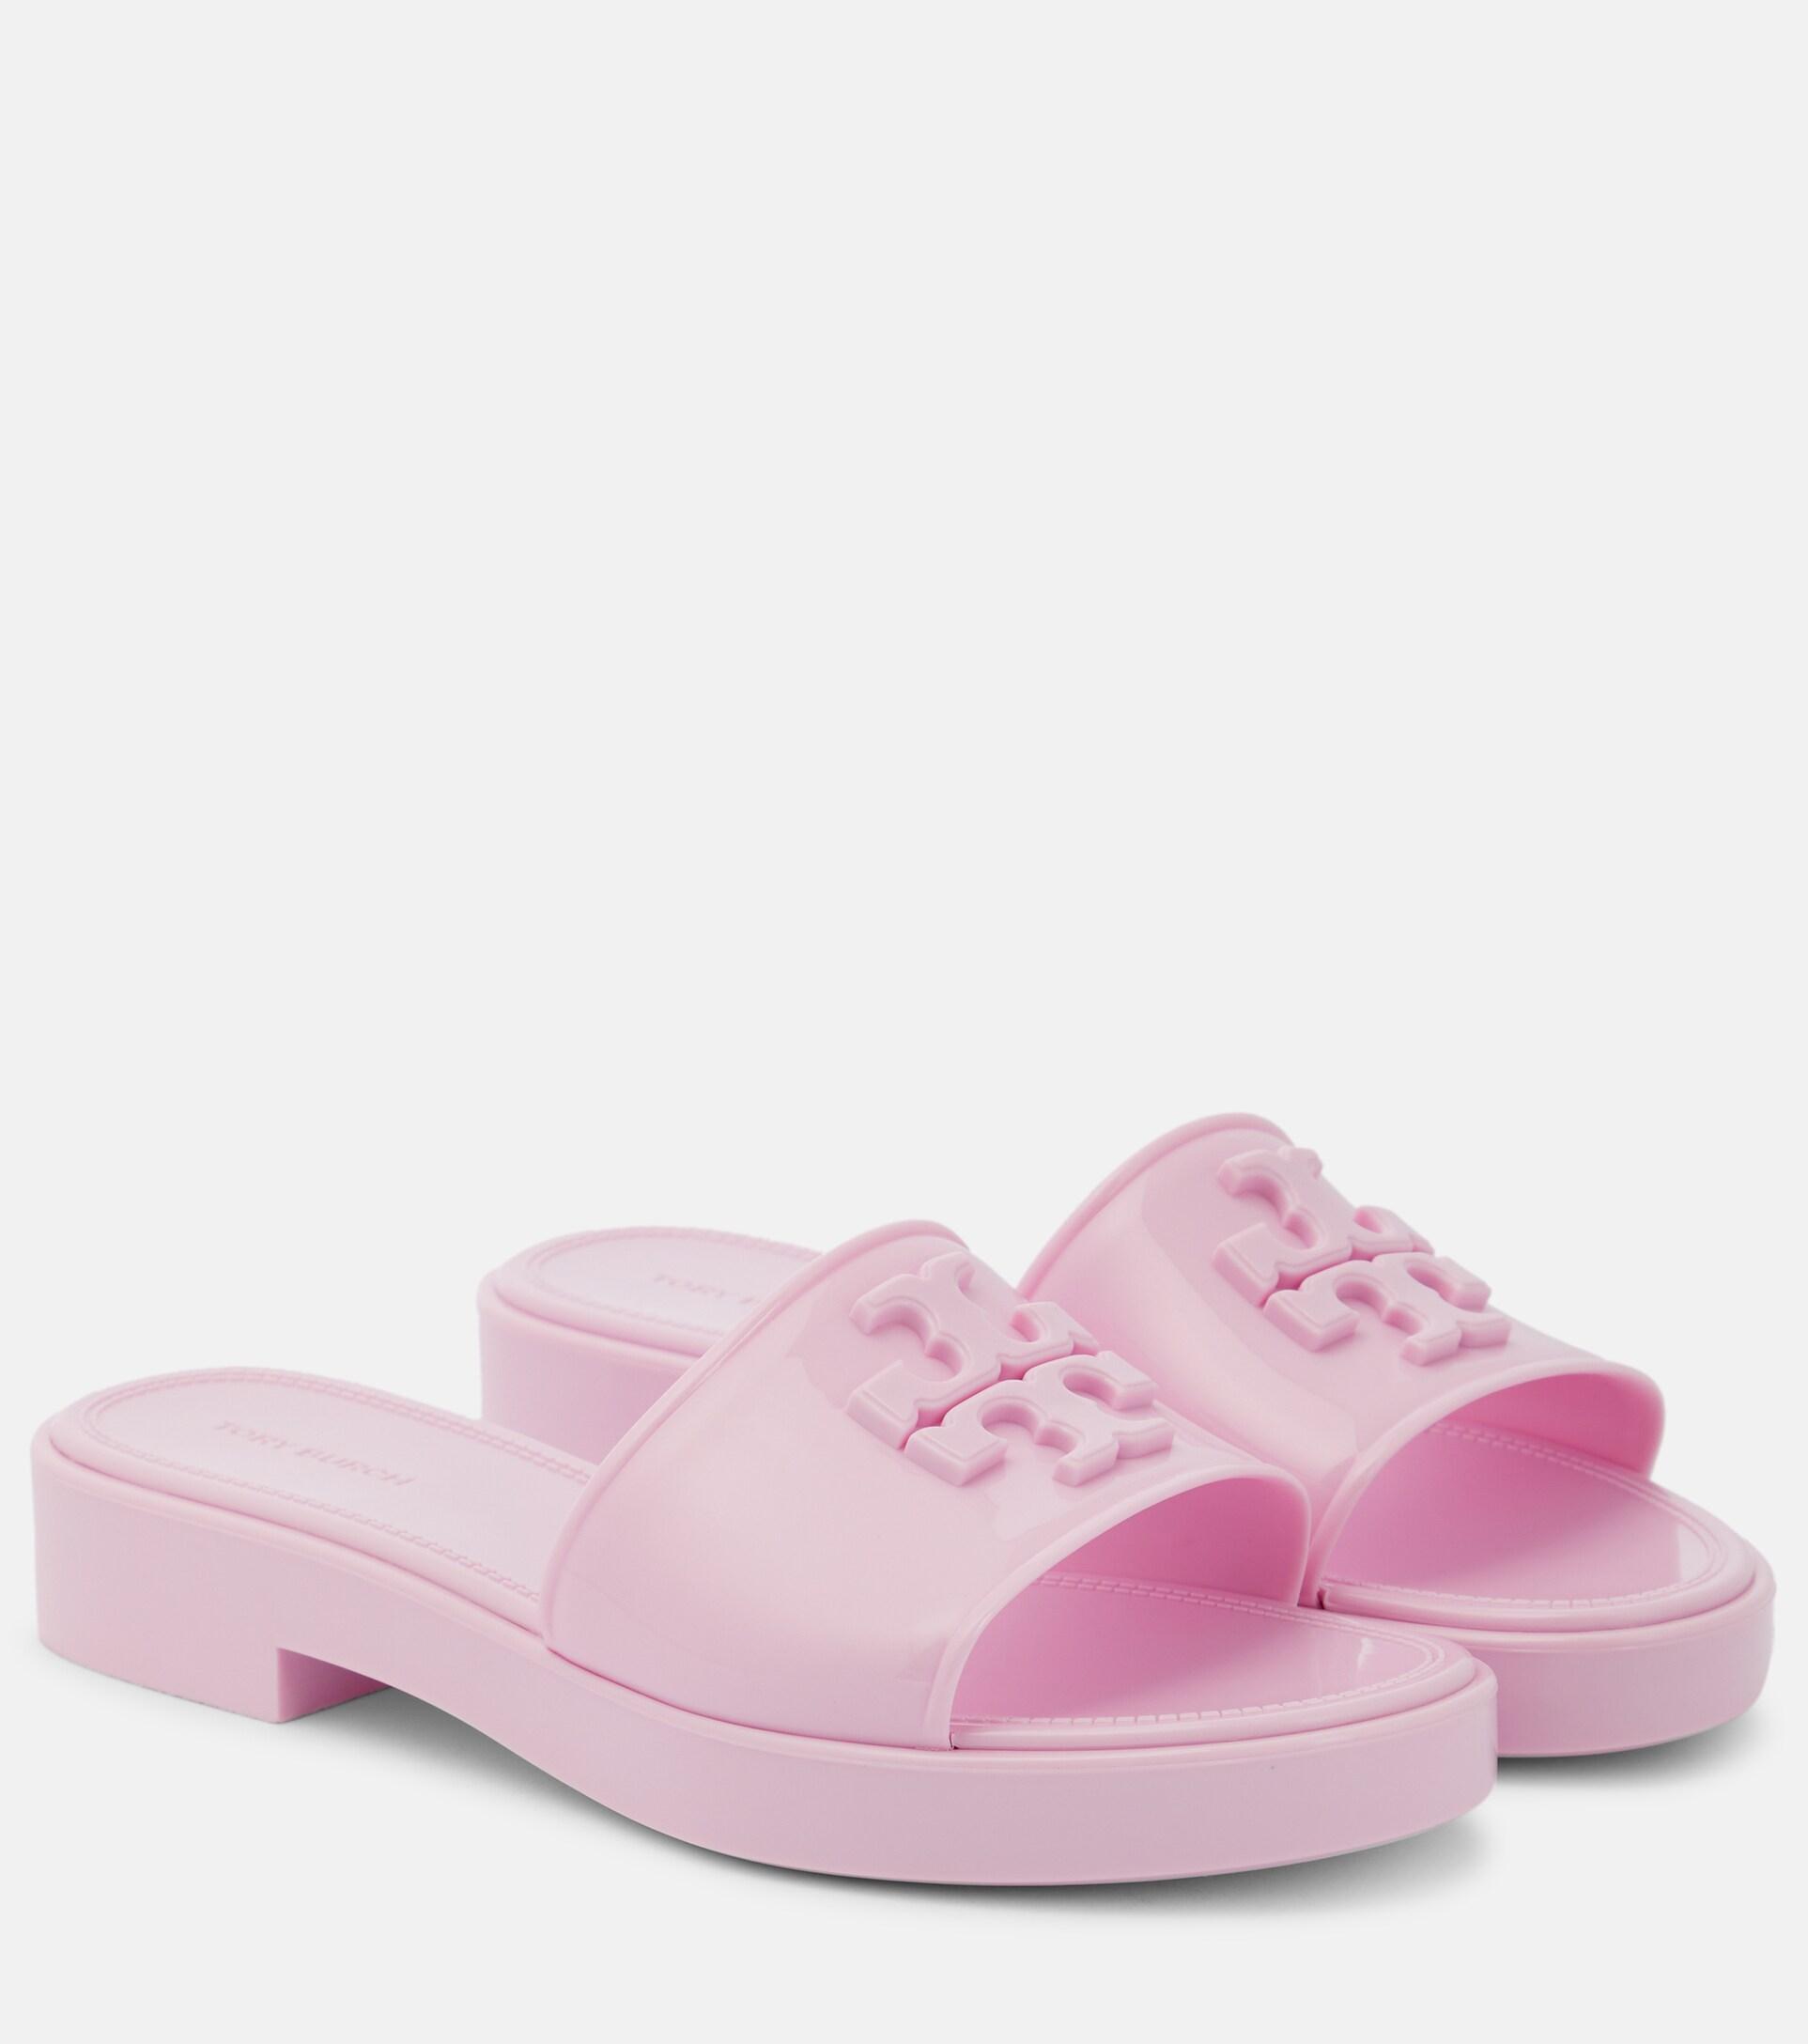 Tory Burch Eleanor Jelly Double T Slides in Pink | Lyst